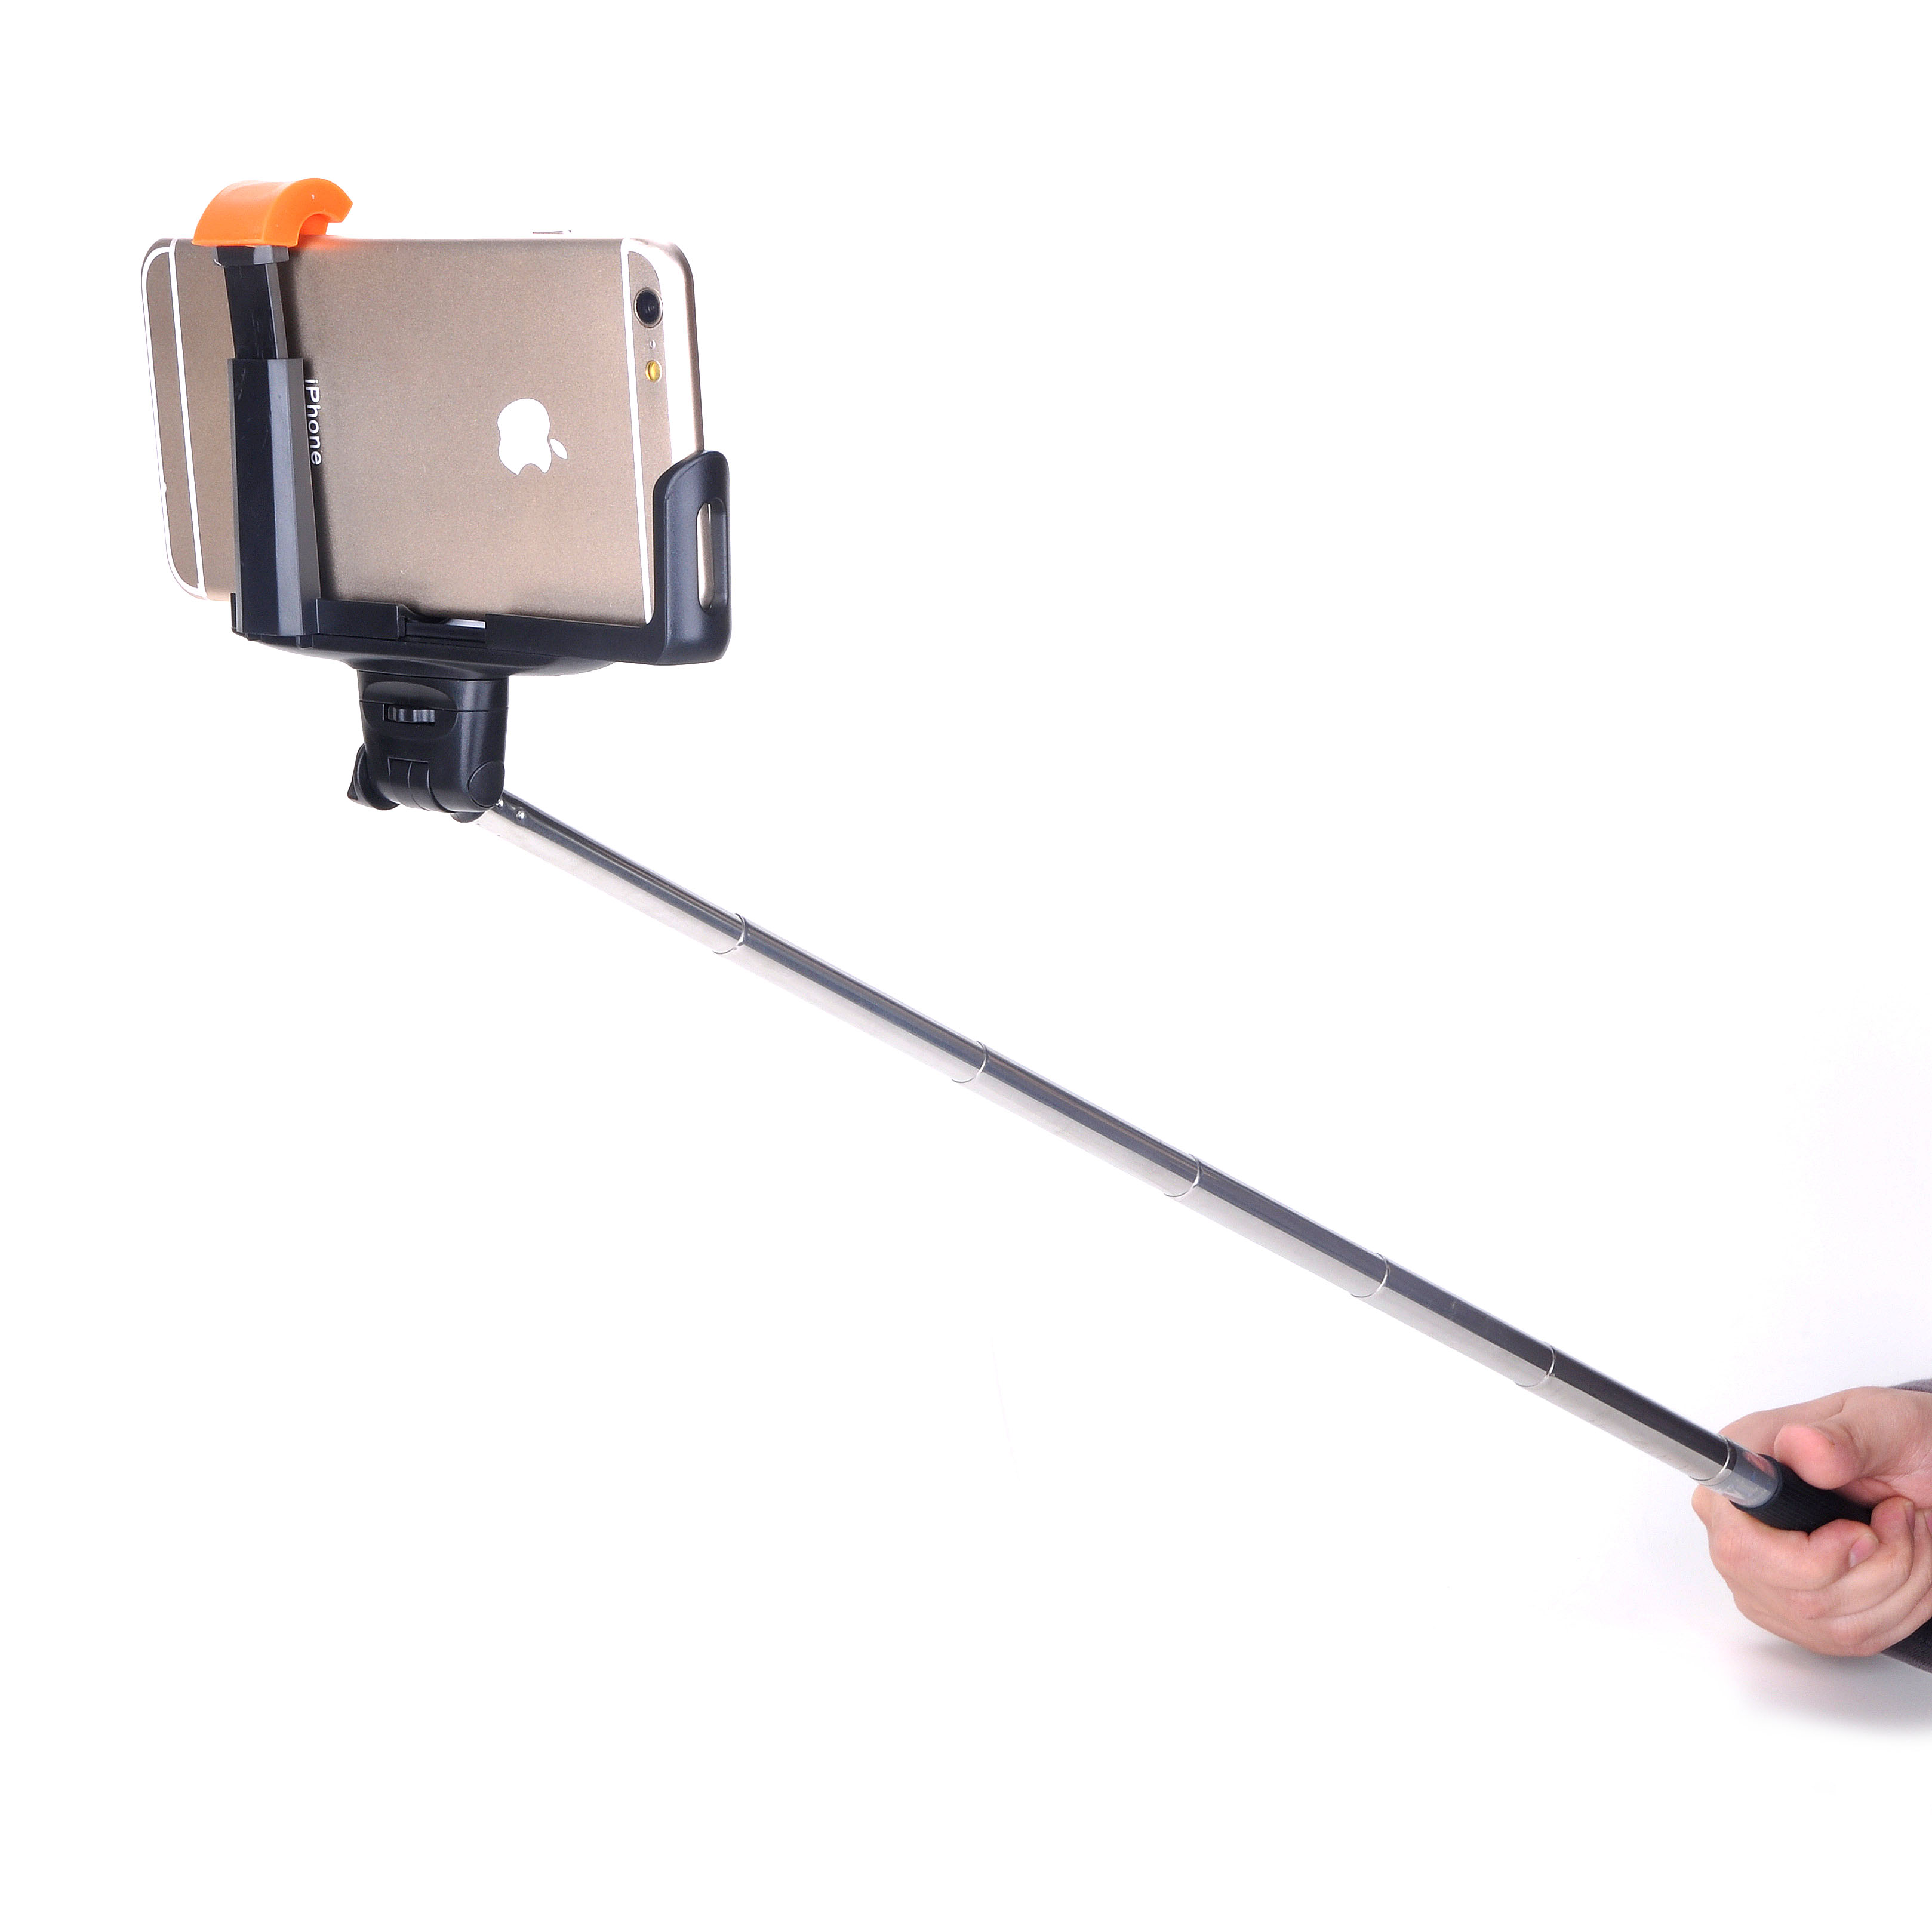 Minisuit Selfie Stick Pro with Built-In Remote for Apple & Android, Black - image 5 of 7